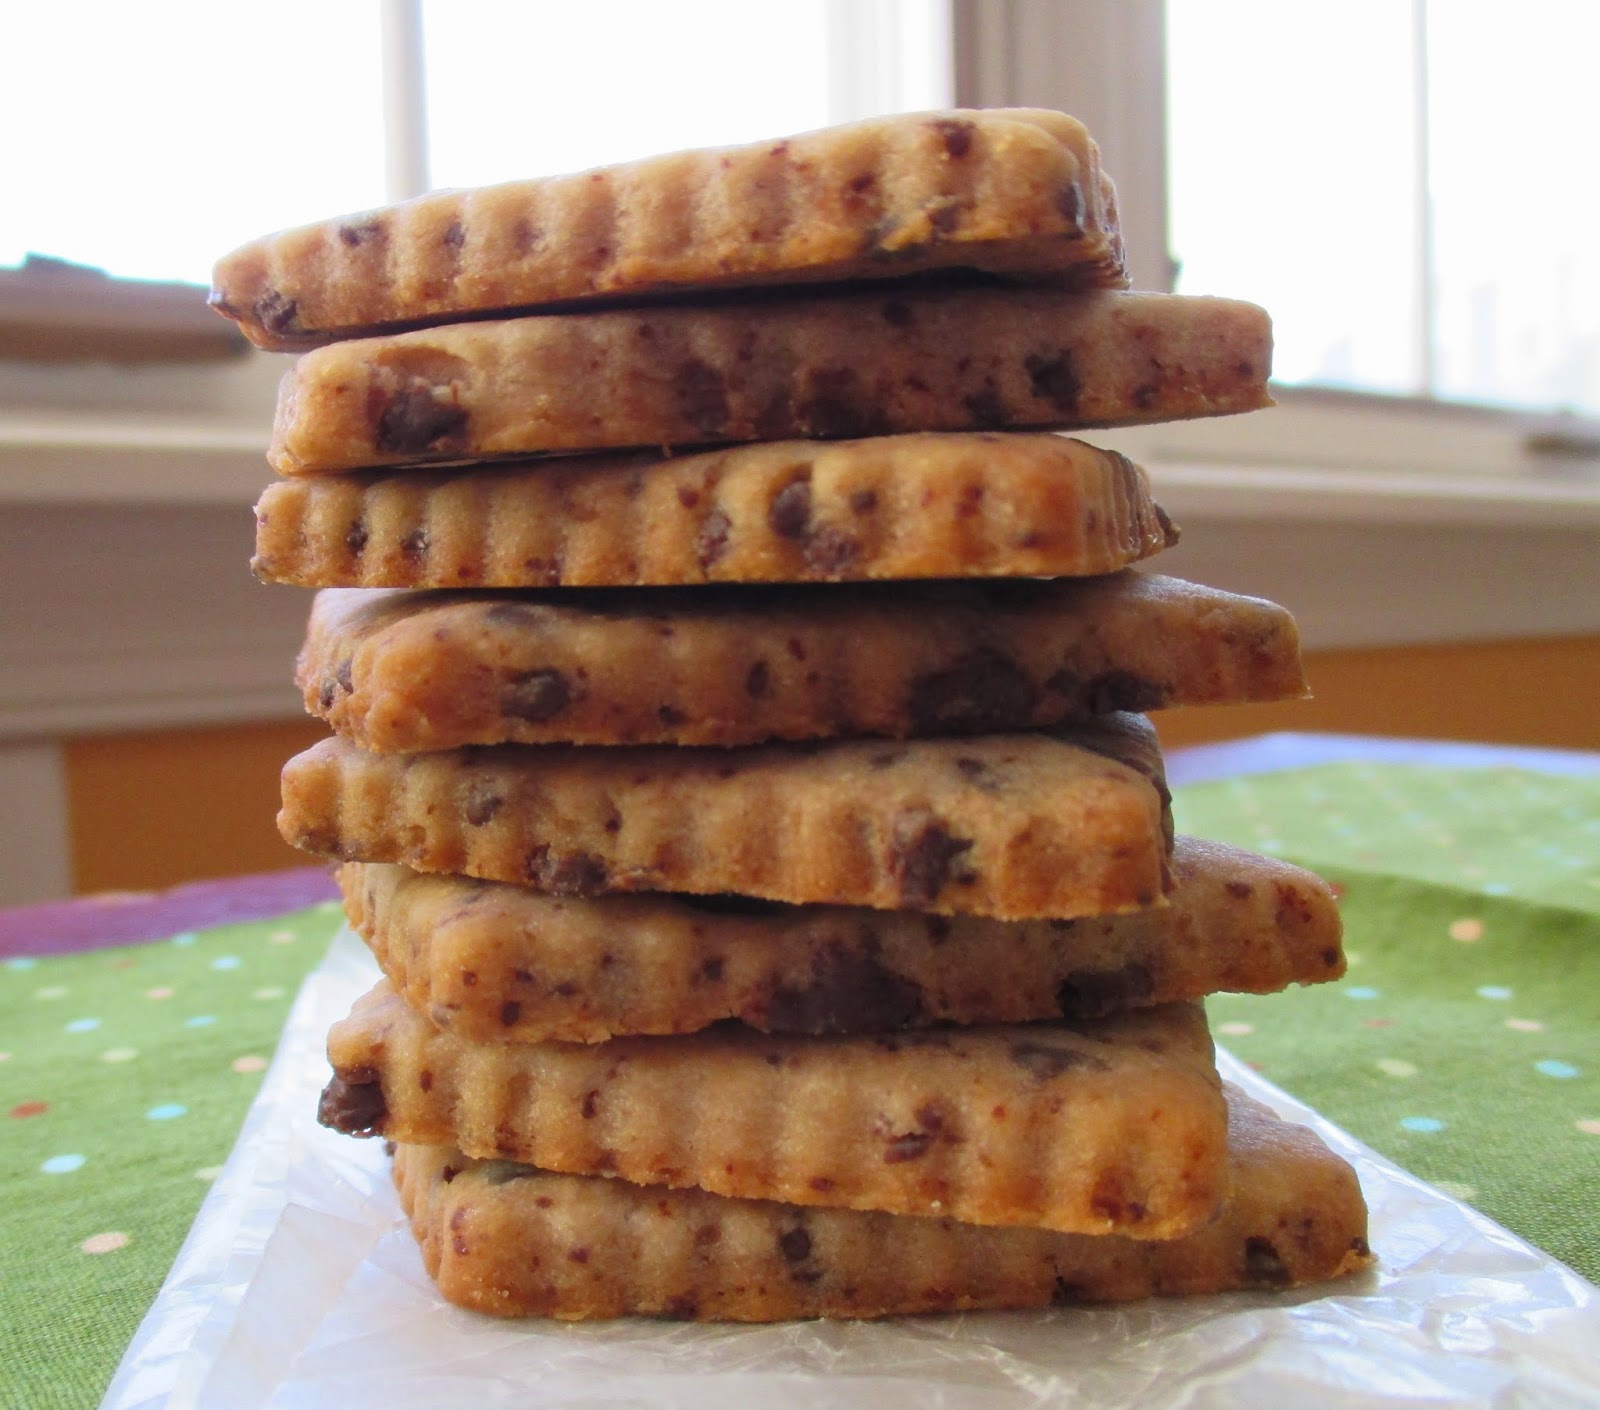 chestnut chocolate wafer cookies